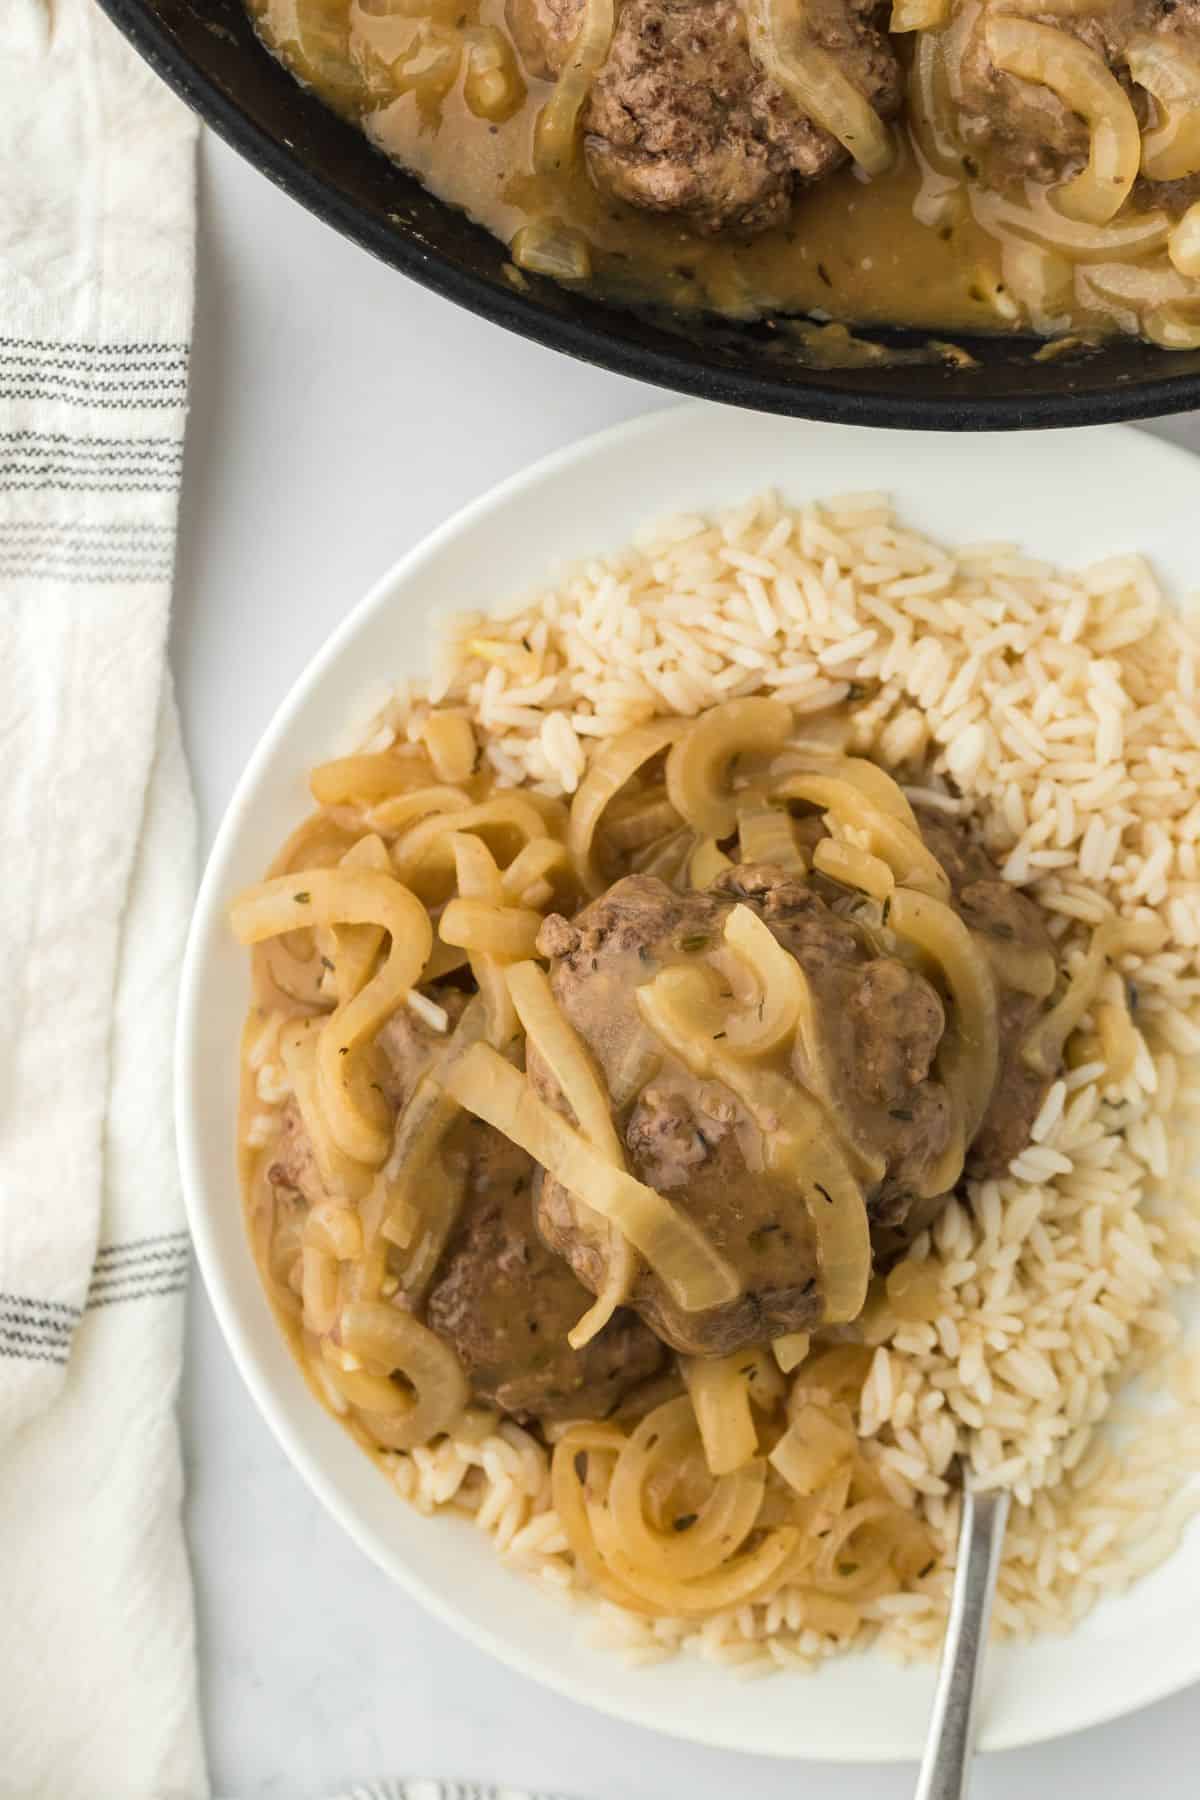 Overhead shot of rice topped with hamburger steaks and sautéed onions, drenched in a rich onion gravy. The dish is accompanied by a fork, and there’s a skillet and a striped towel in the background